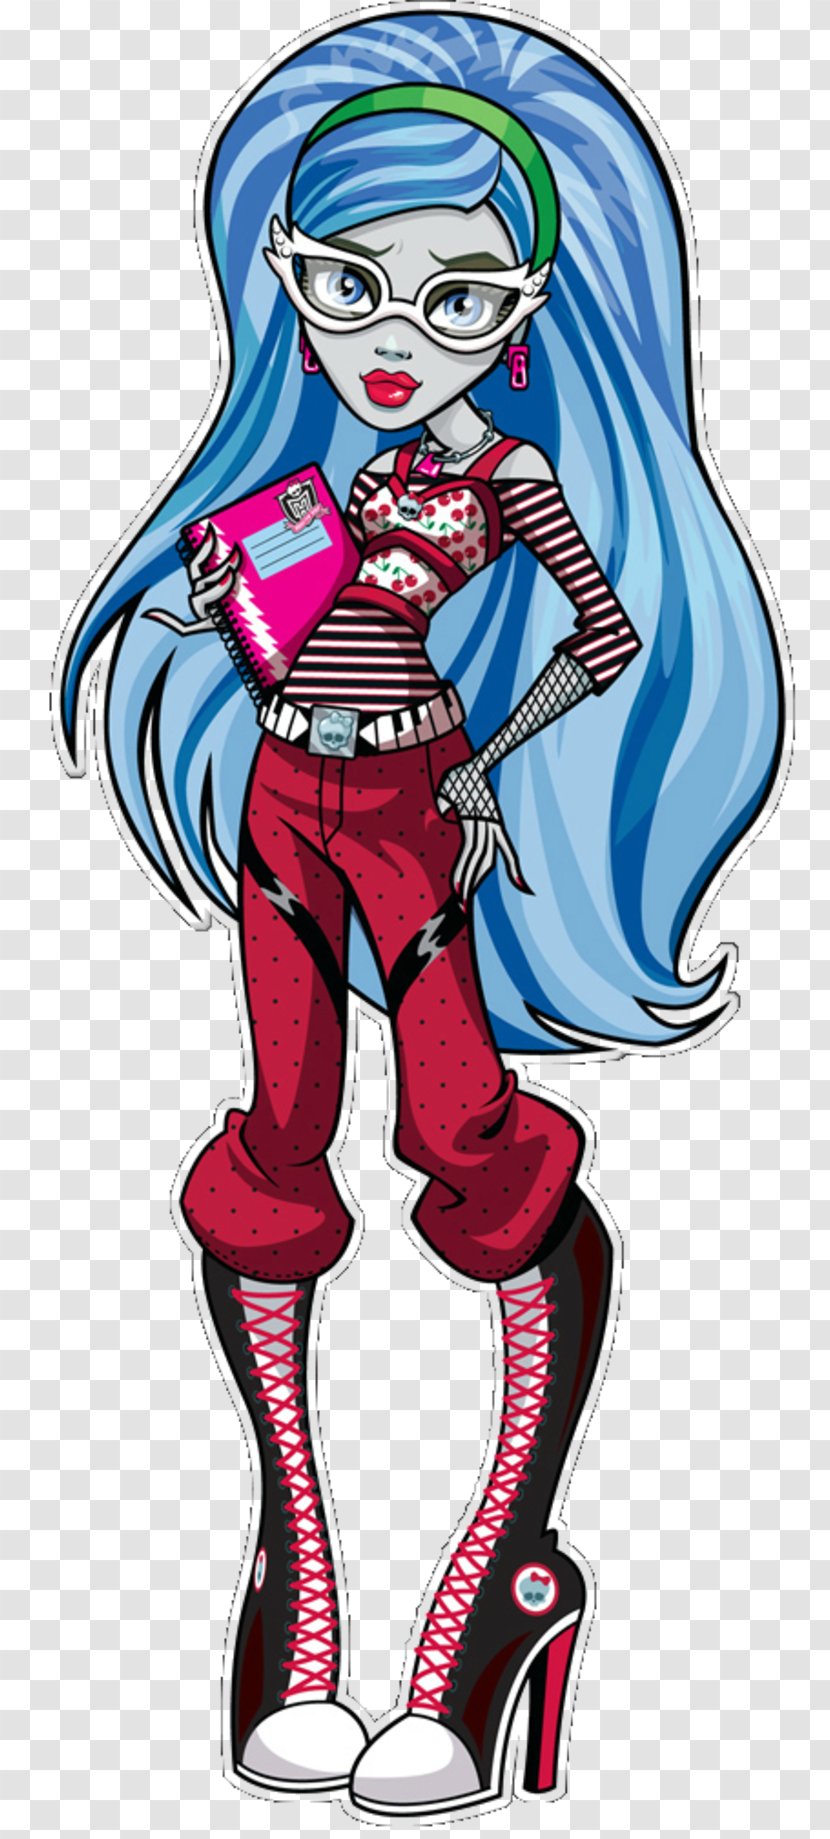 Monster High Lagoona Blue Ghoul Doll - Jester - Schools Out Background Transparent PNG